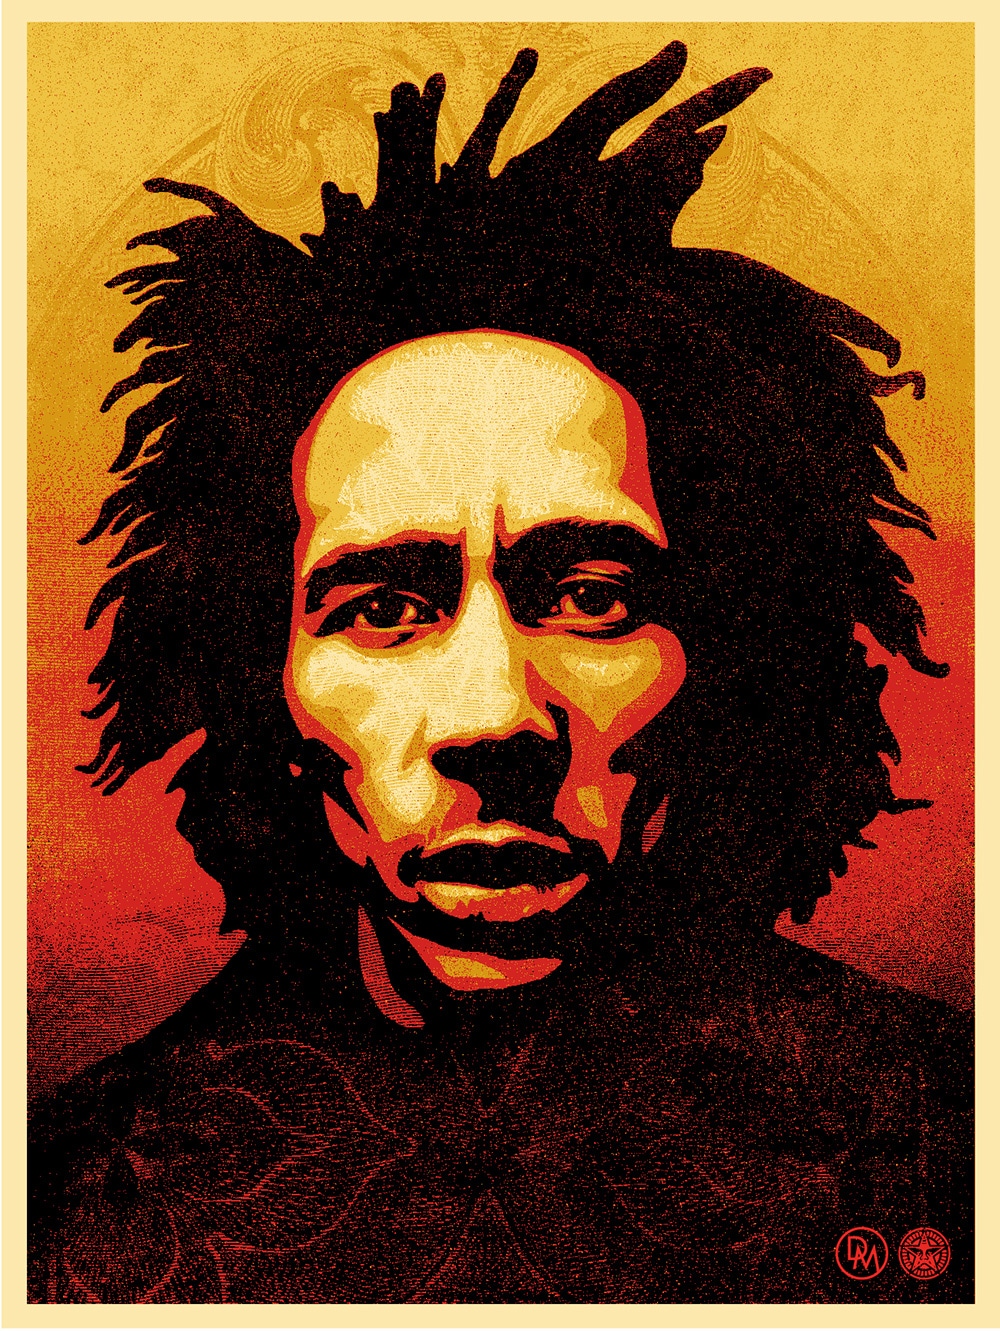 Bob Marley Print by Obey and Dennis Morris